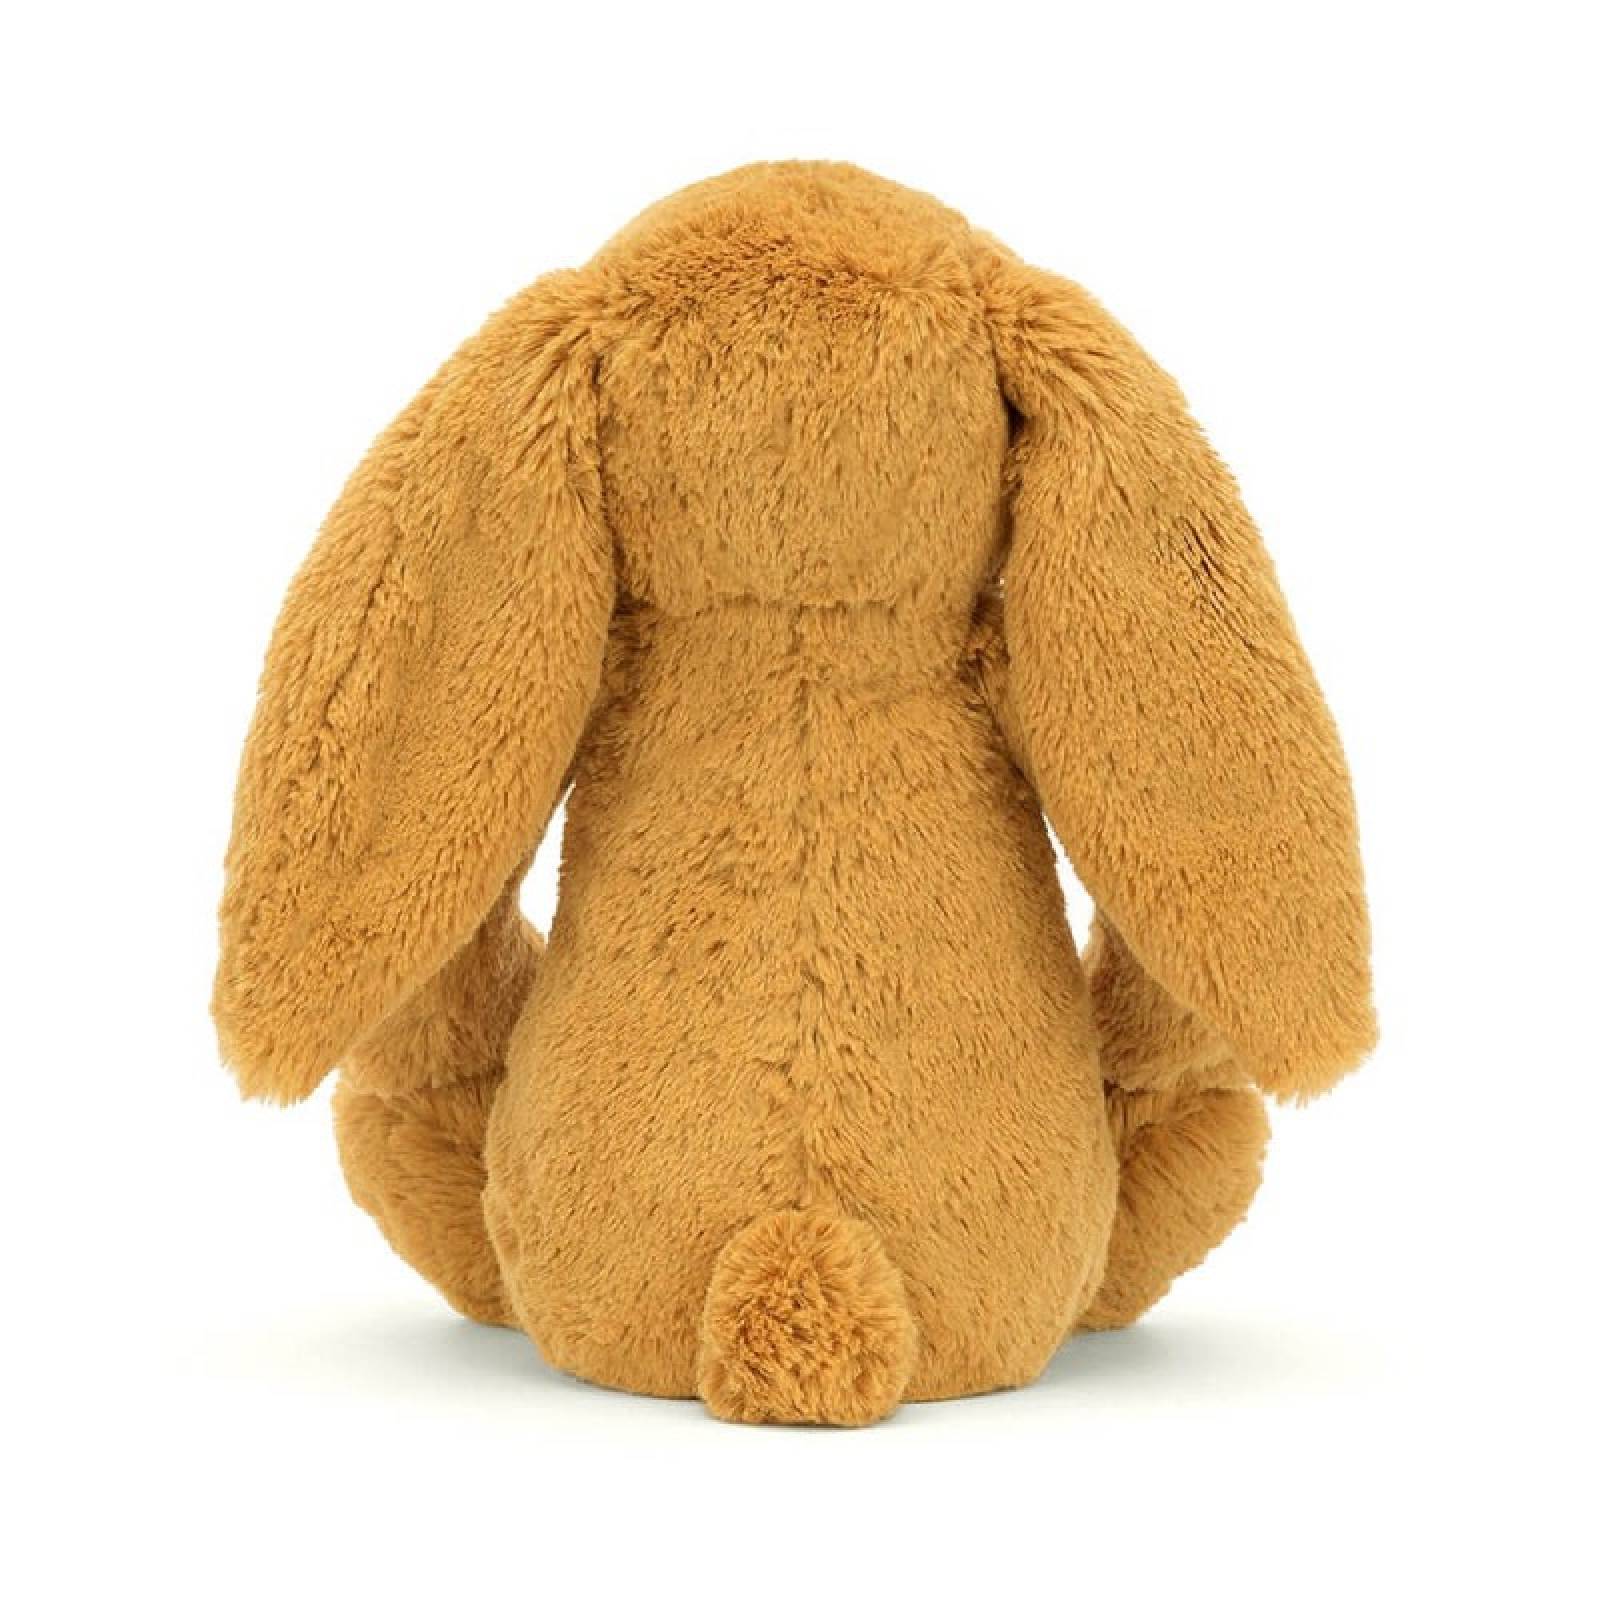 Medium Bashful Bunny In Golden Soft Toy By Jellycat 0+ thumbnails